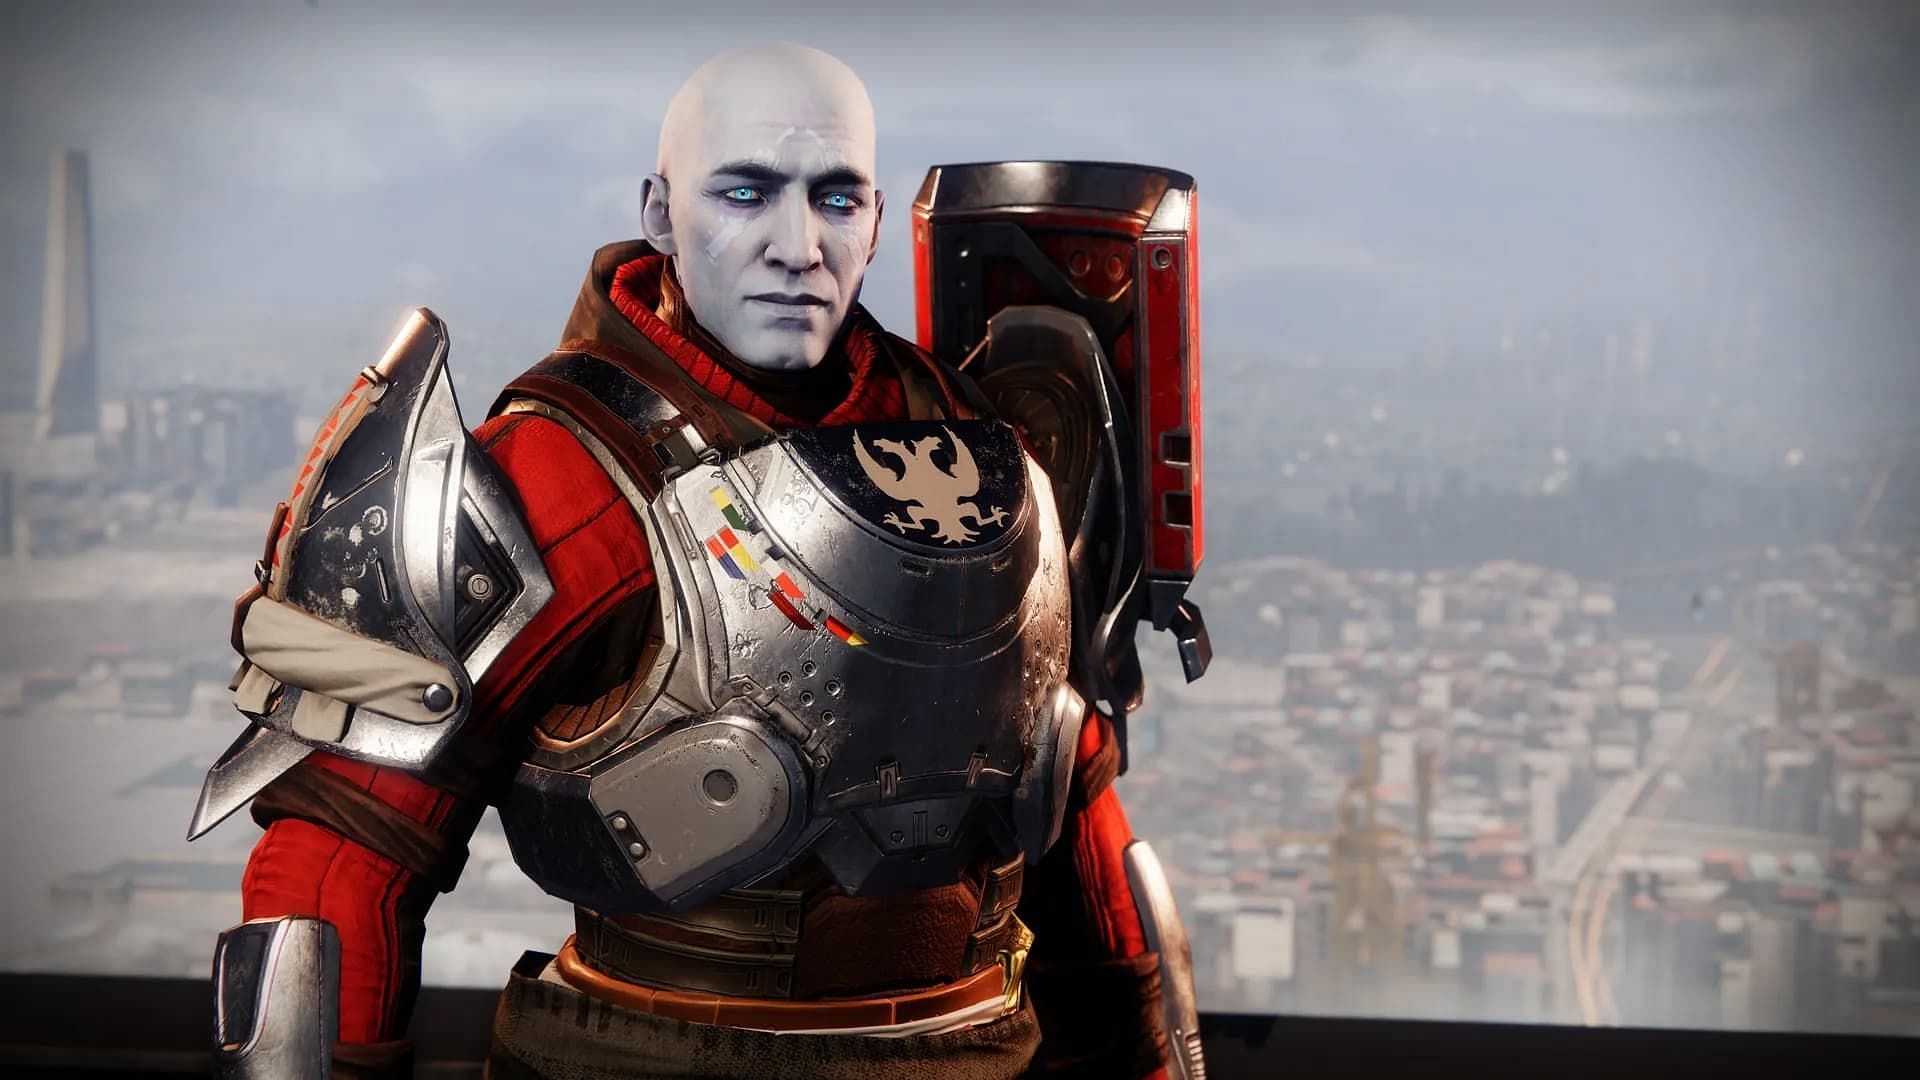 Commander Zavala is the leader of the Vanguard in the Destiny 2 universe.